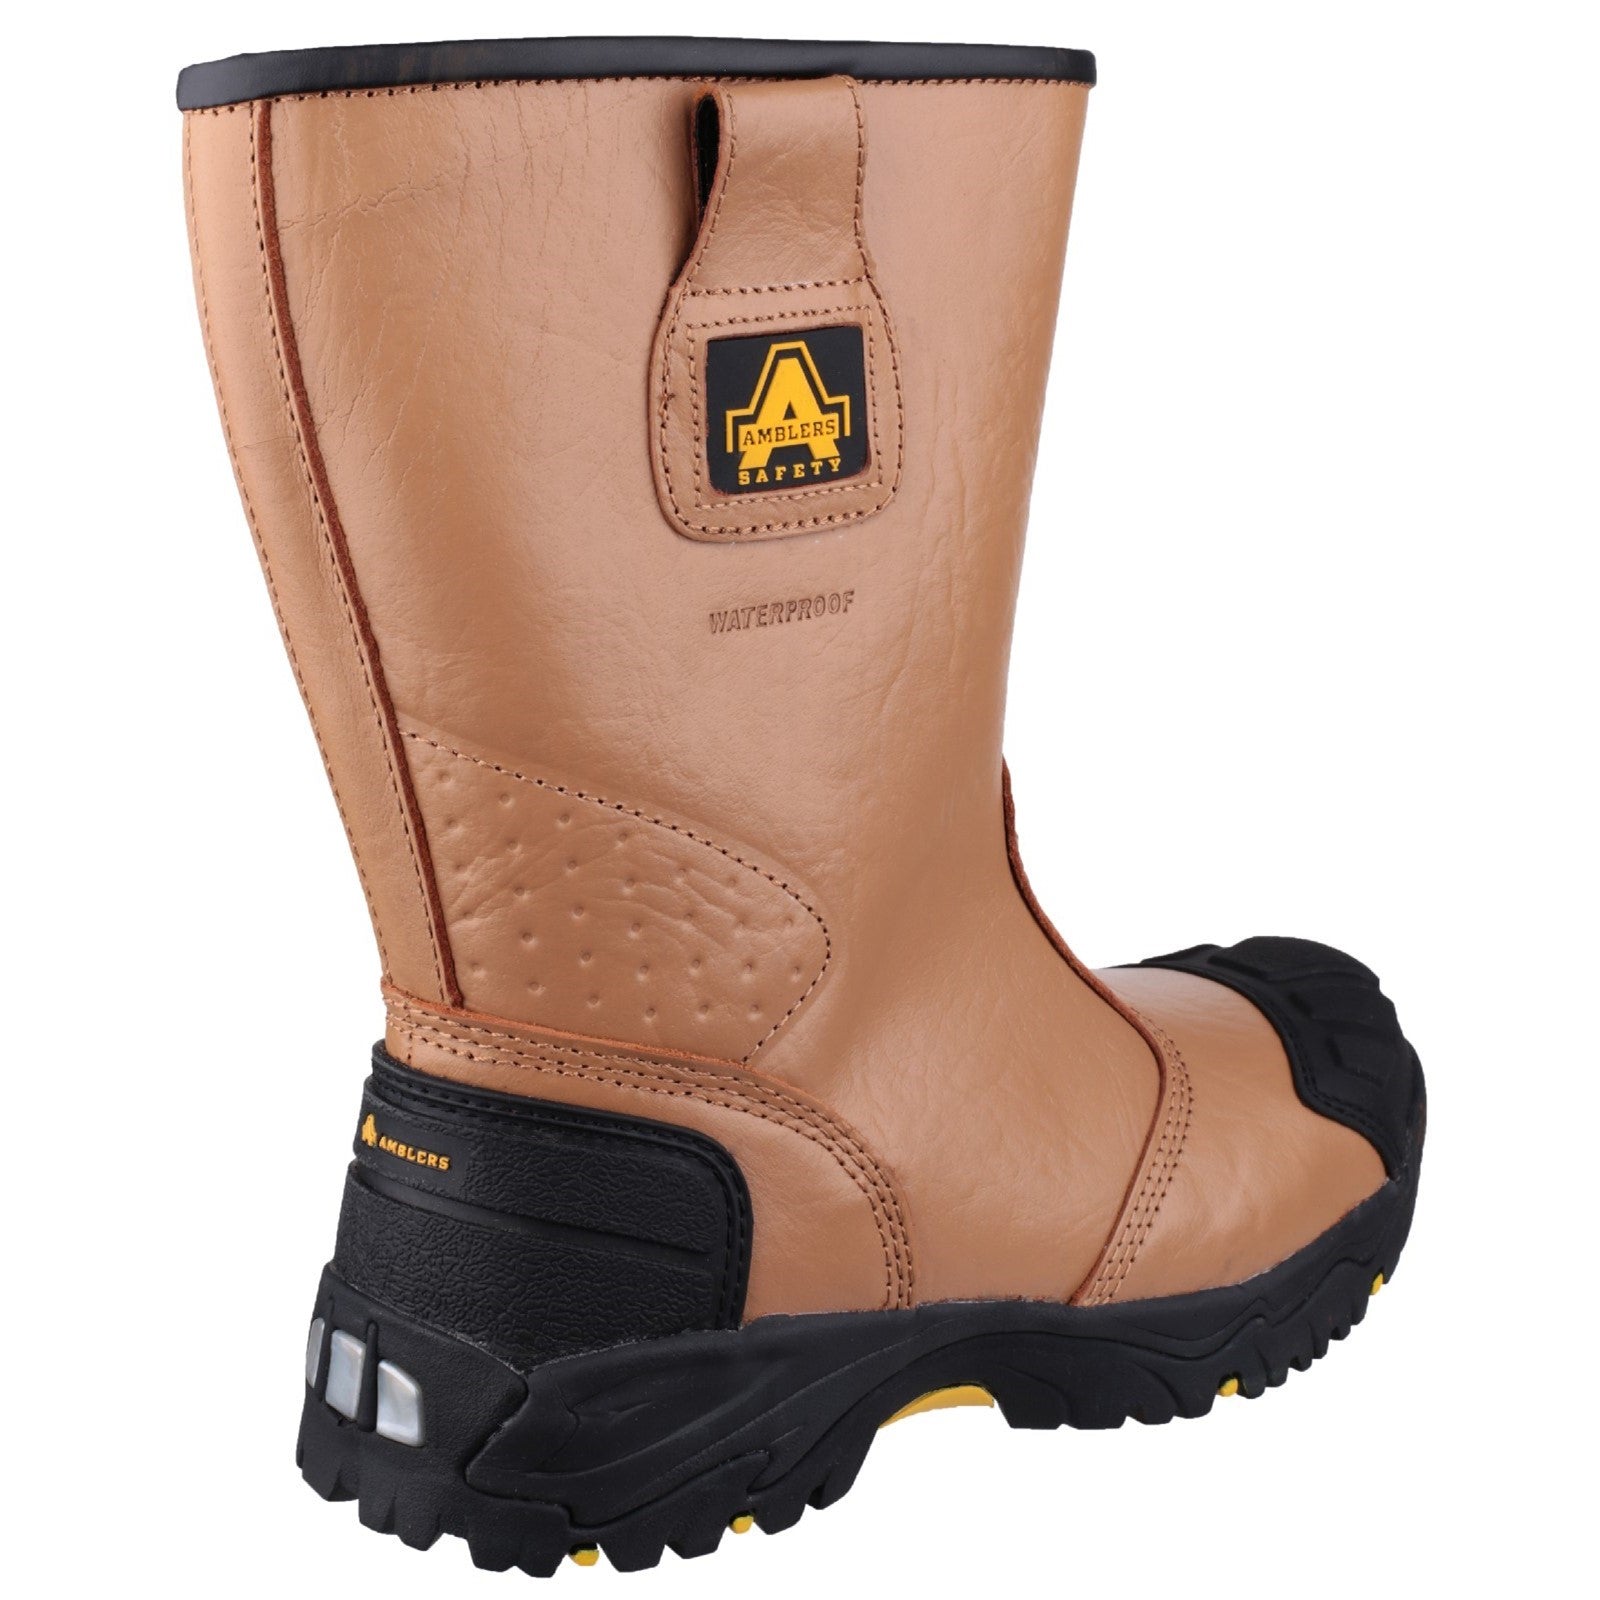 Amblers FS143 Waterproof pull on Safety Rigger Boot